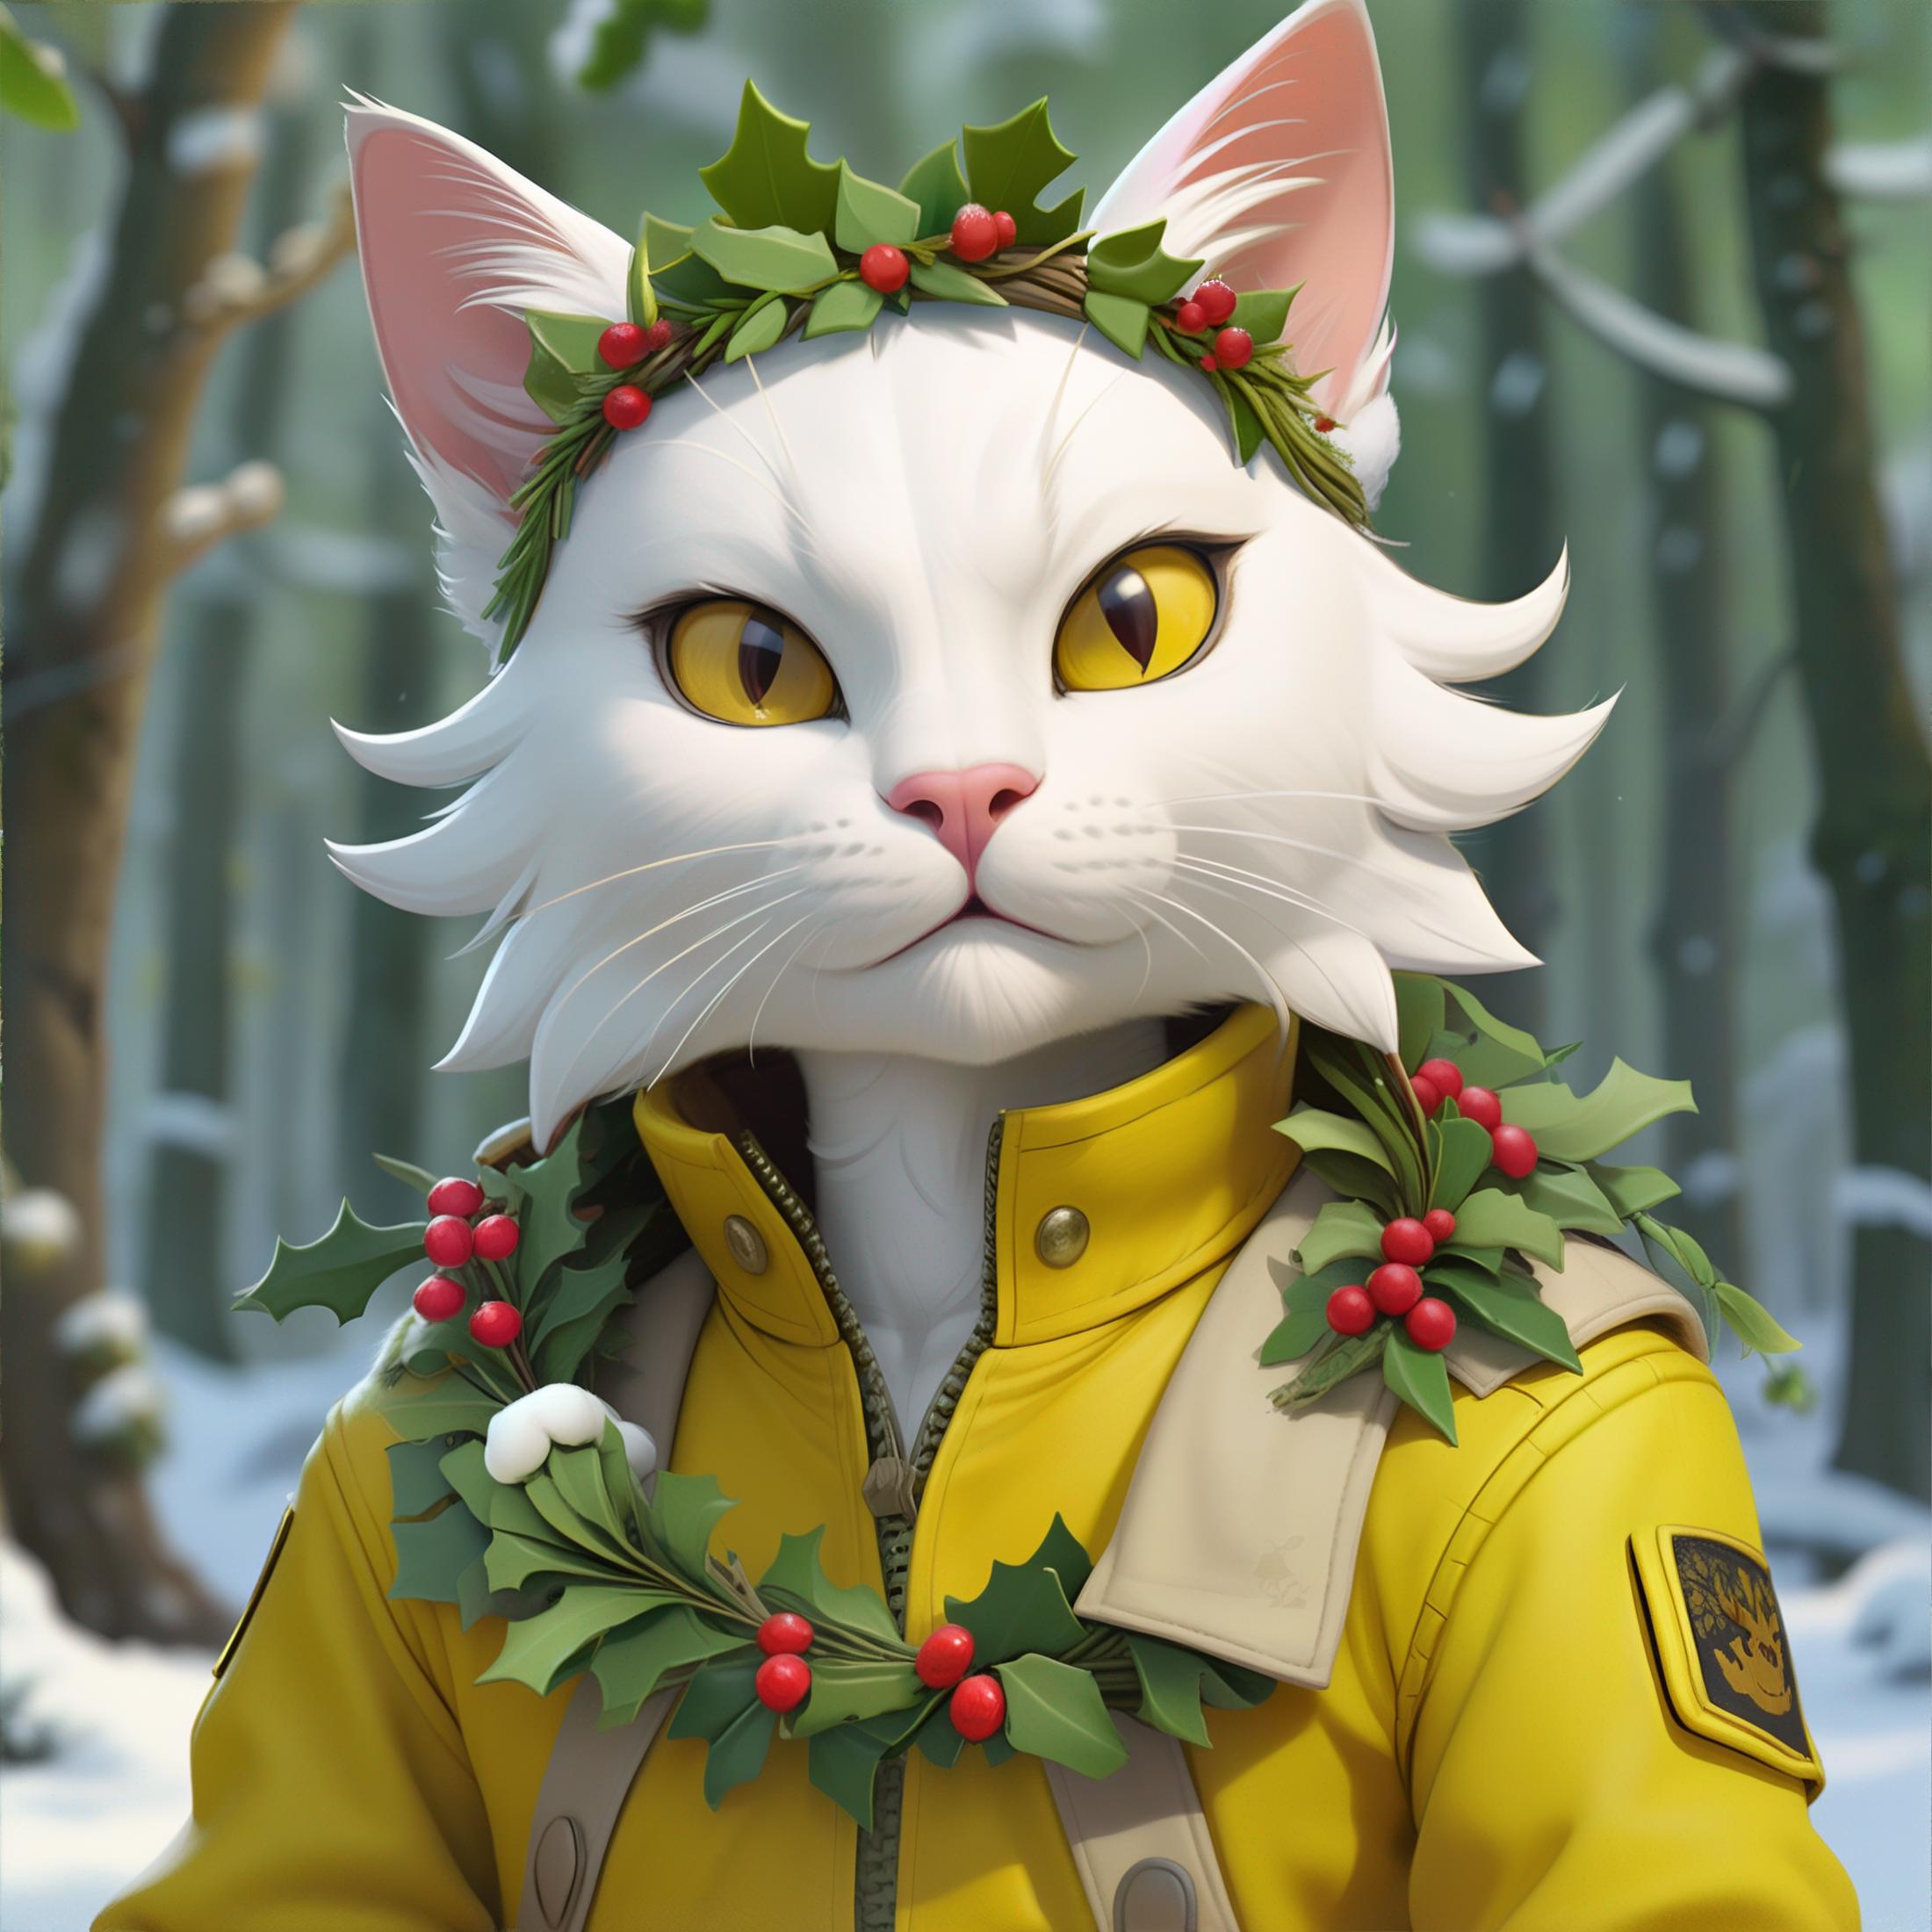 A cartoon cat wearing a yellow jacket and a crown of berries on its head.